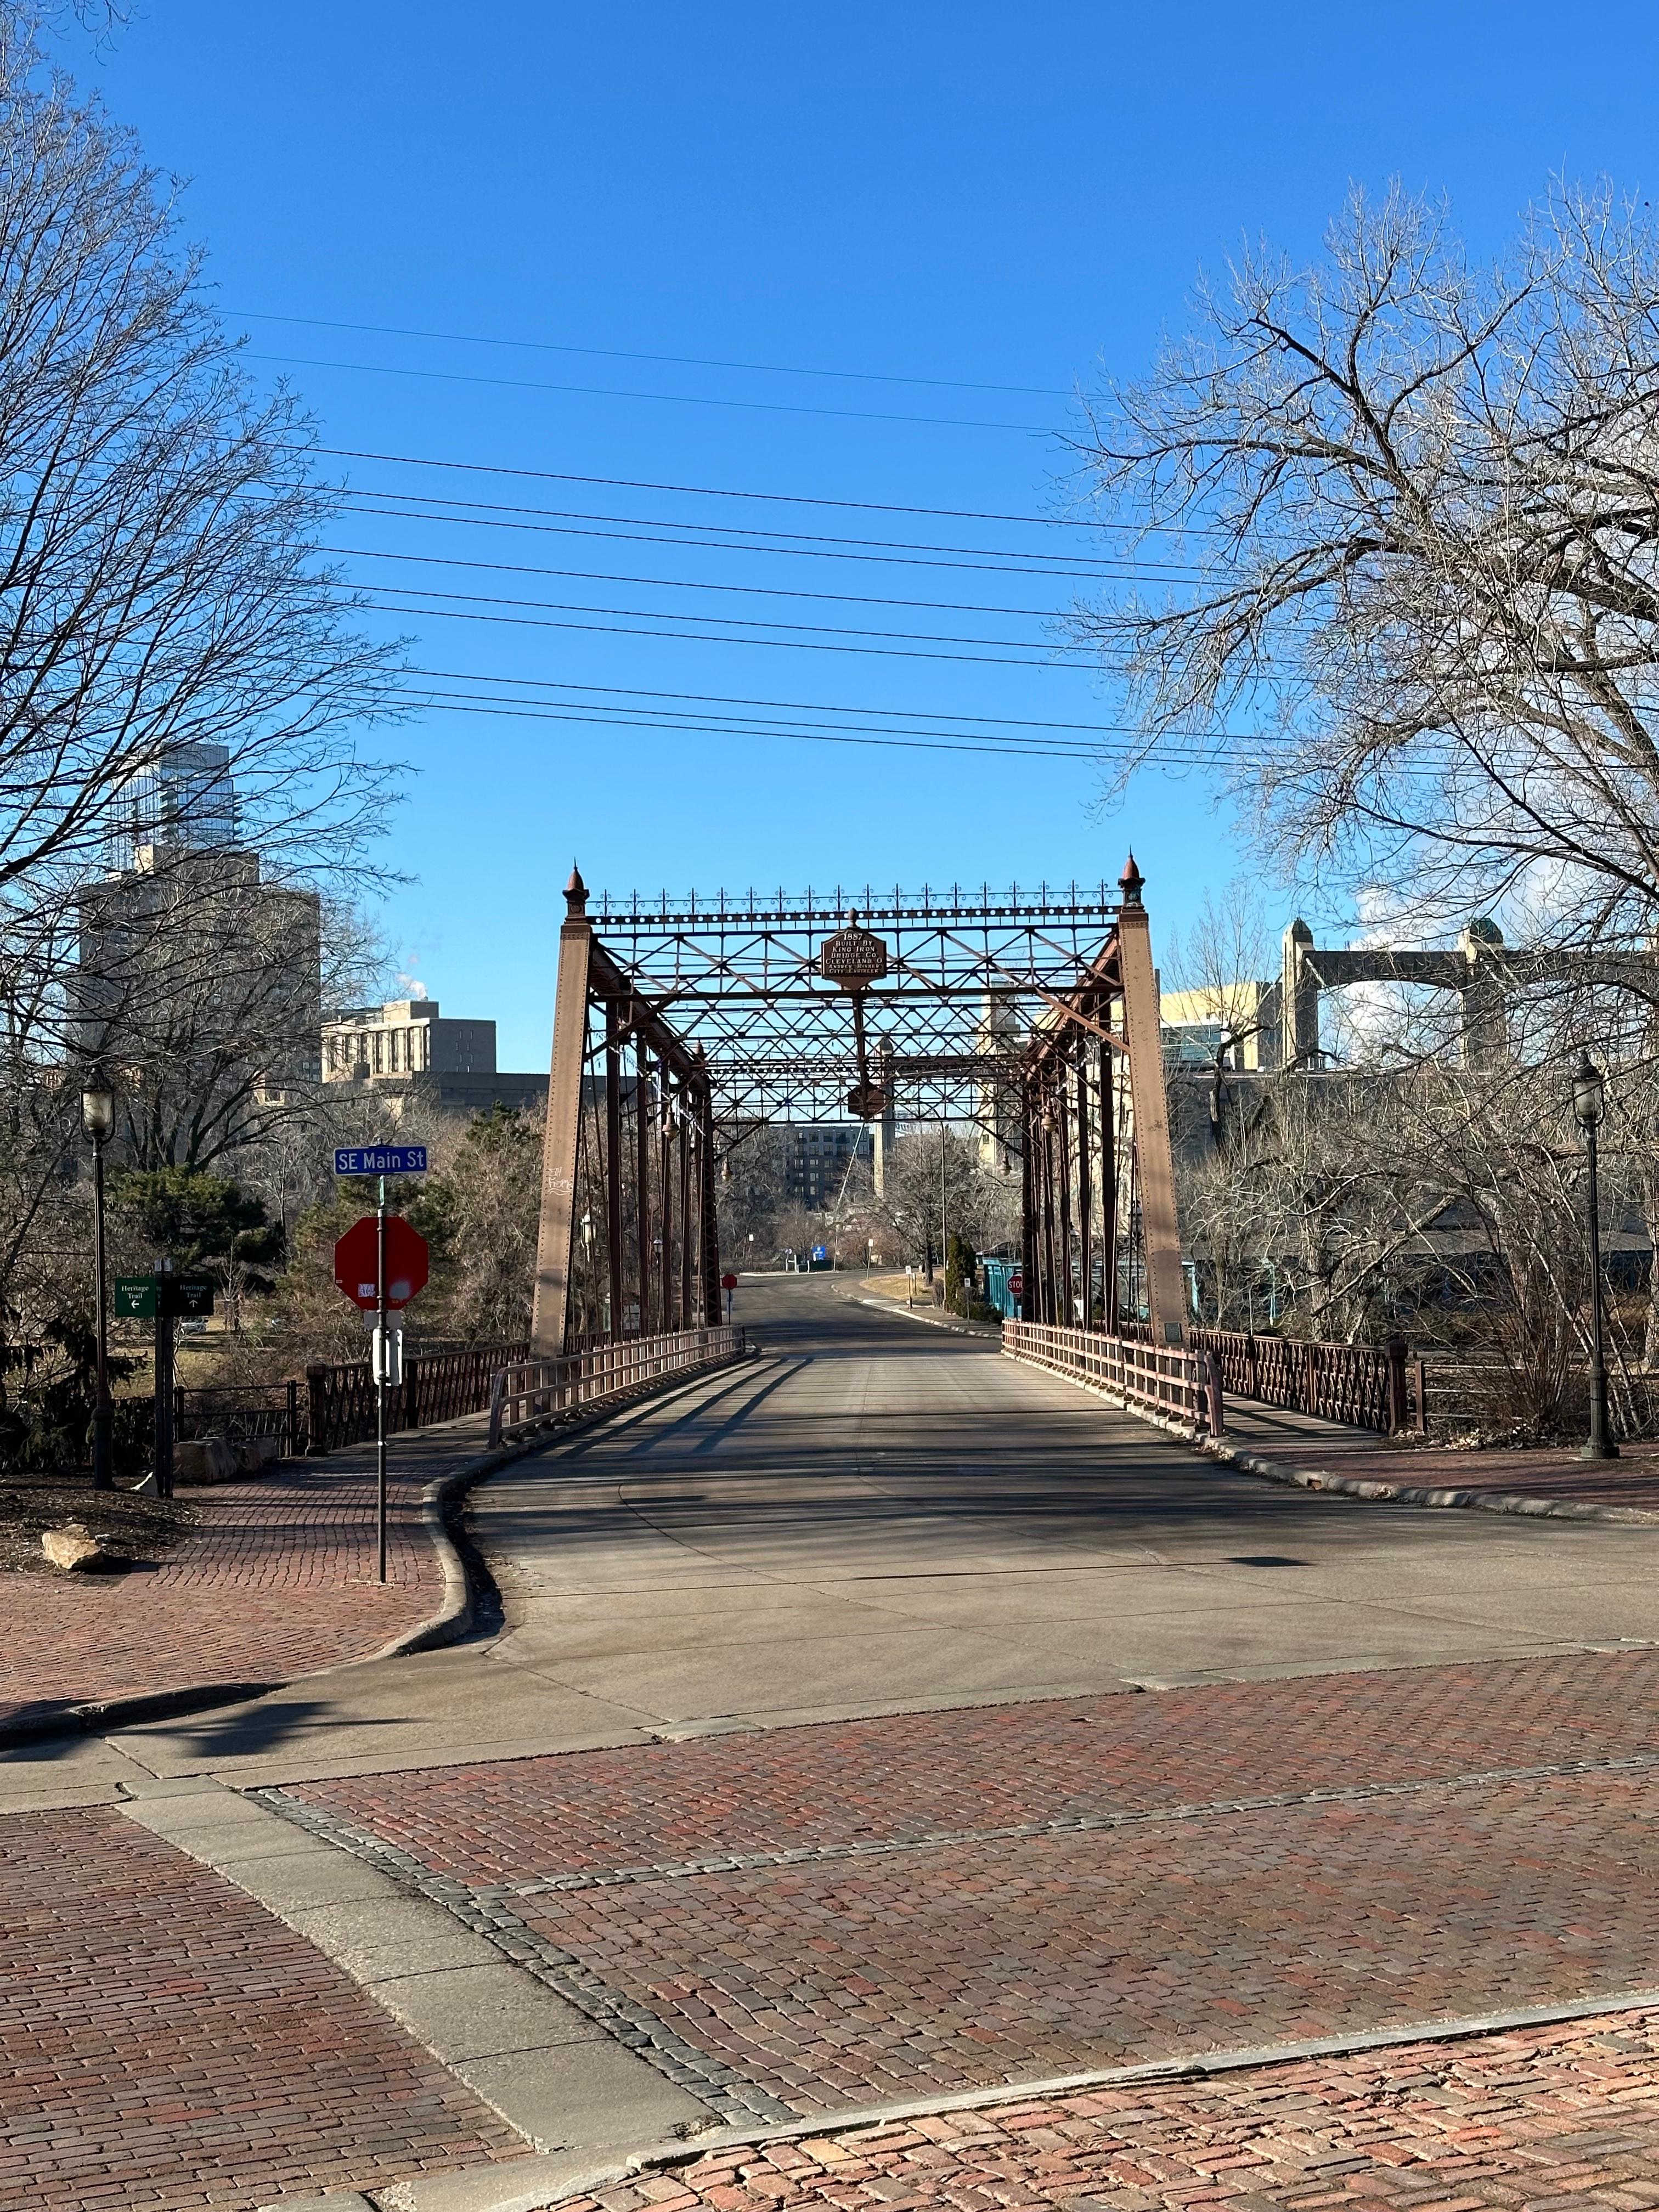 The old bridge to Nicollet Island, by my favorite coffee shop.